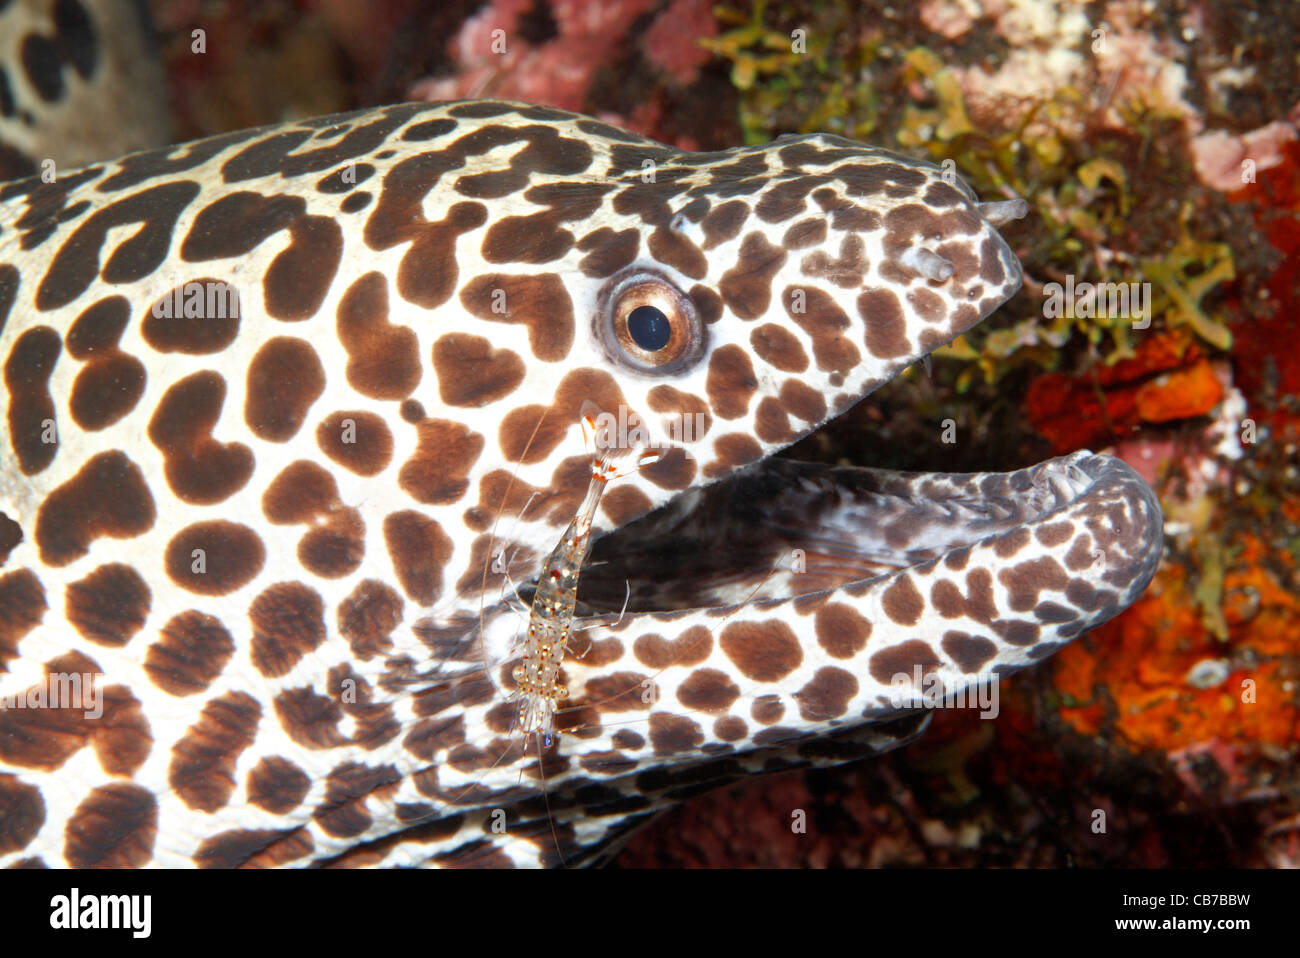 Honeycomb Moray Eel, also called Leopard moray eel, Gymnothorax favagineus, with a cleaner shrimp, Urocaridella antonbruunii on its face. Stock Photo